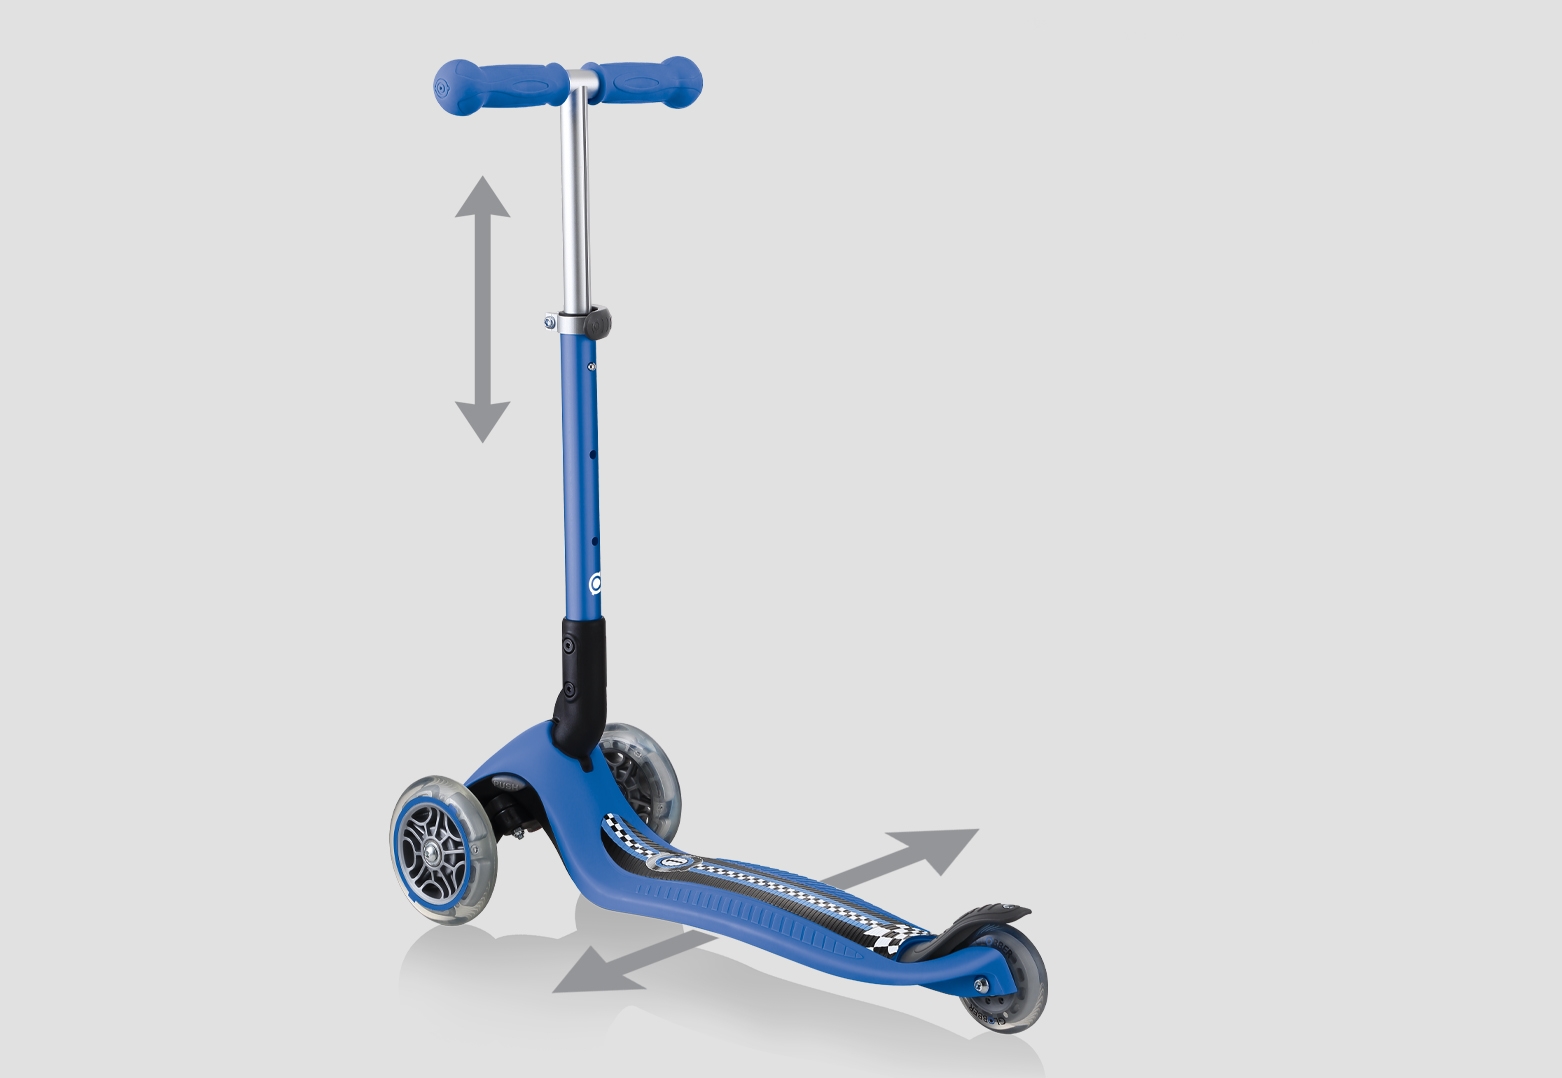 3 wheel scooter for 2 year old